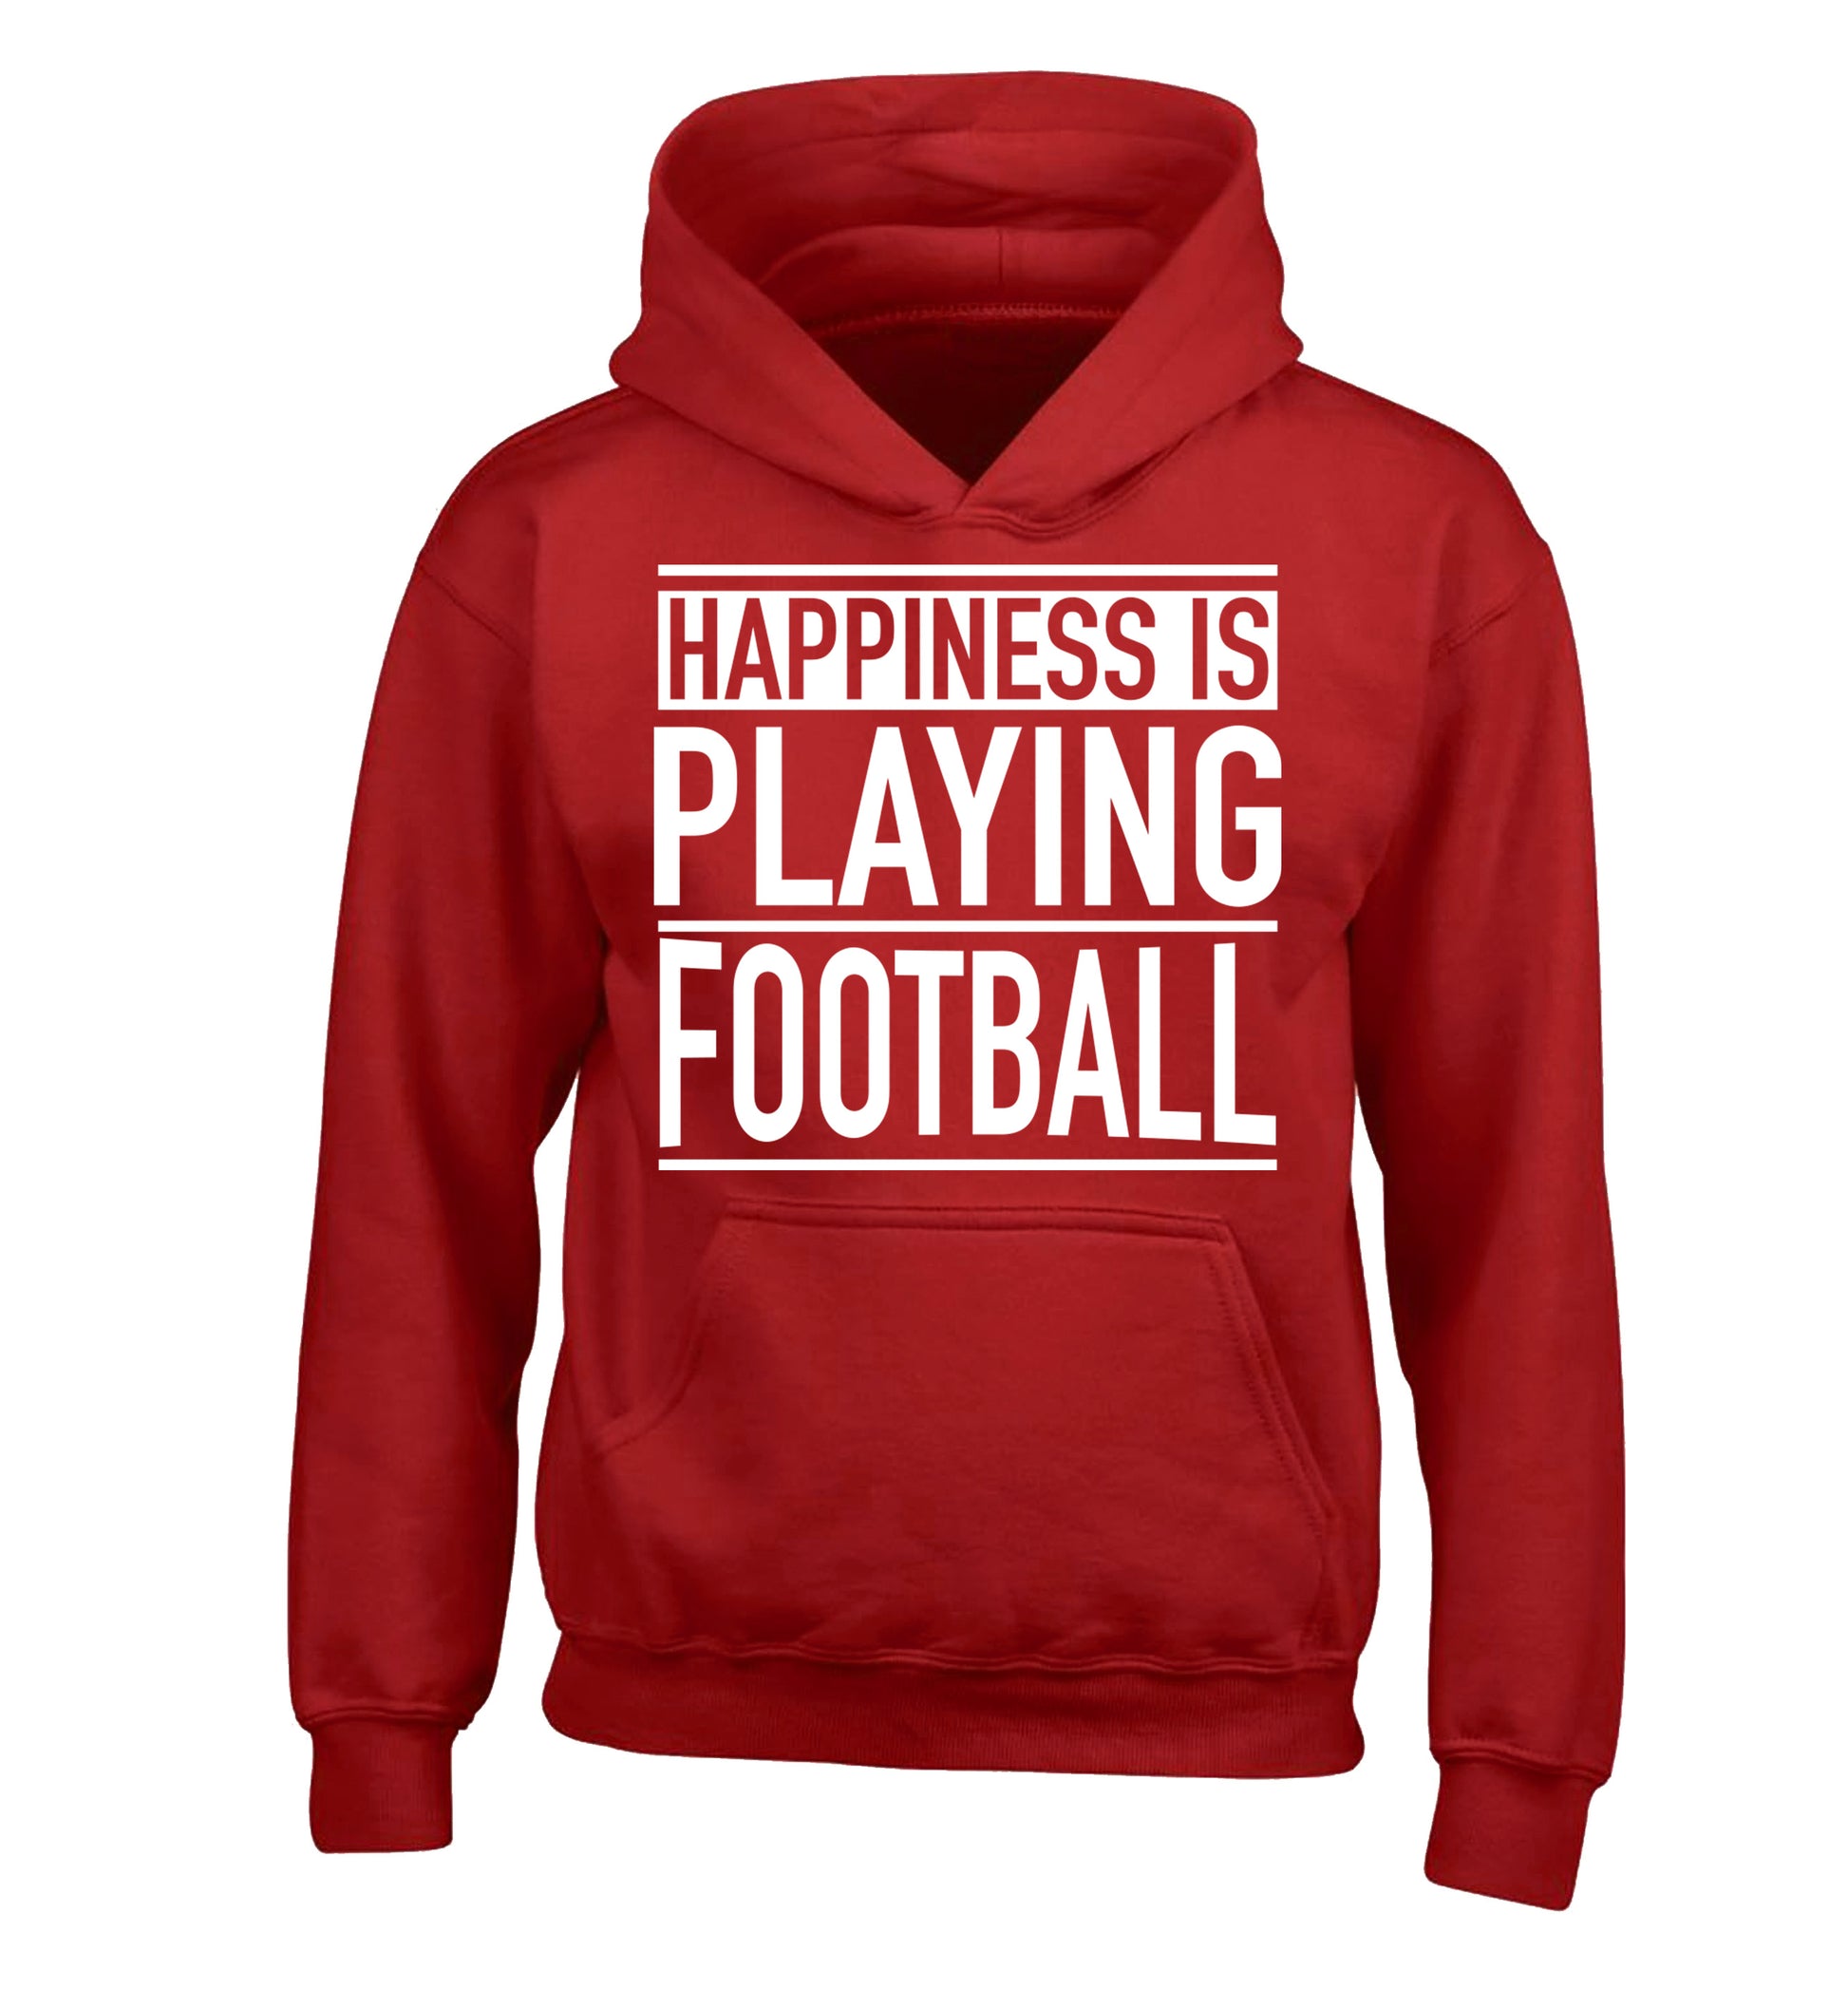 Happiness is playing football children's red hoodie 12-14 Years